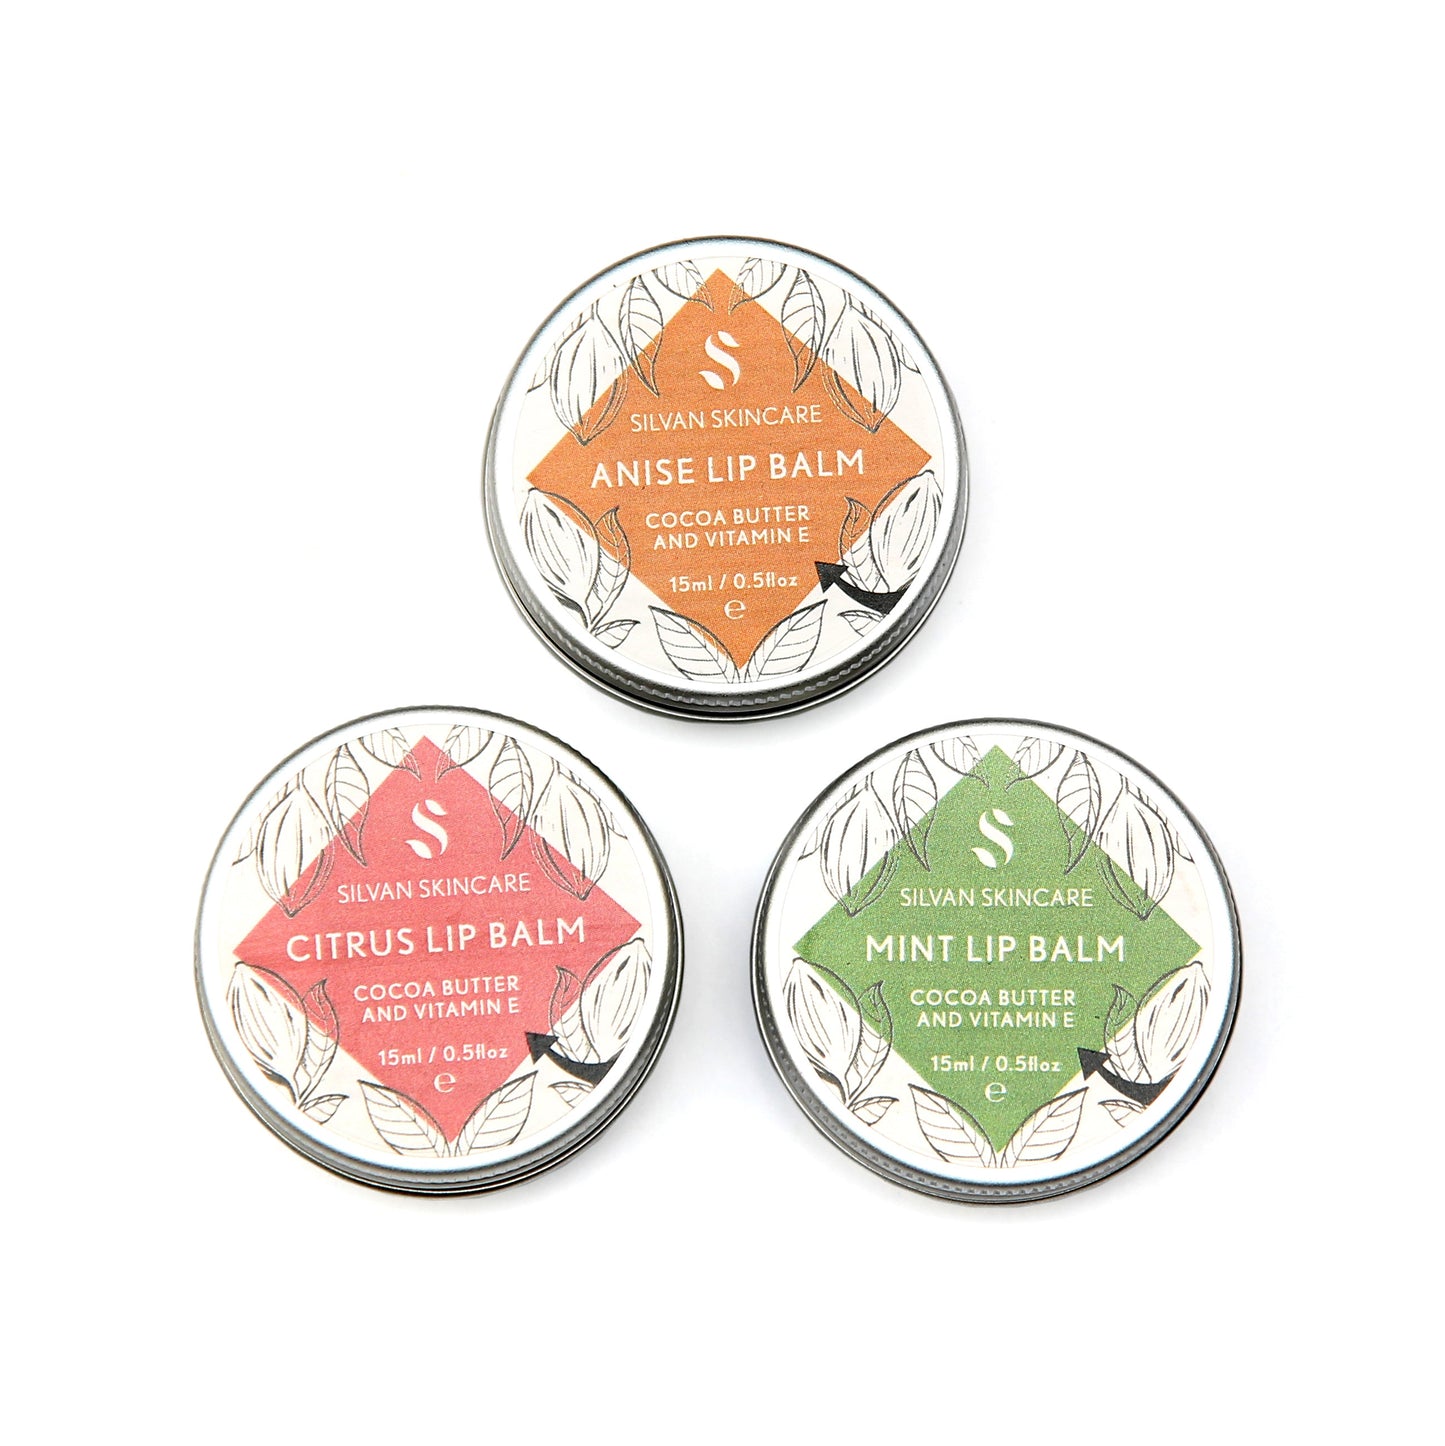 Three tins of Silvan Skincare lip balm are displayed in a square formation. Each tin has a different label (Top-Bottom-Clockwise): Anise Lip Balm (orange), Mint Lip Balm (blue-green) and Citrus Lip Balm (pink) .Each contains cocoa butter and vitamin E. Aluminium container and lid. Recyclable or Reusable.